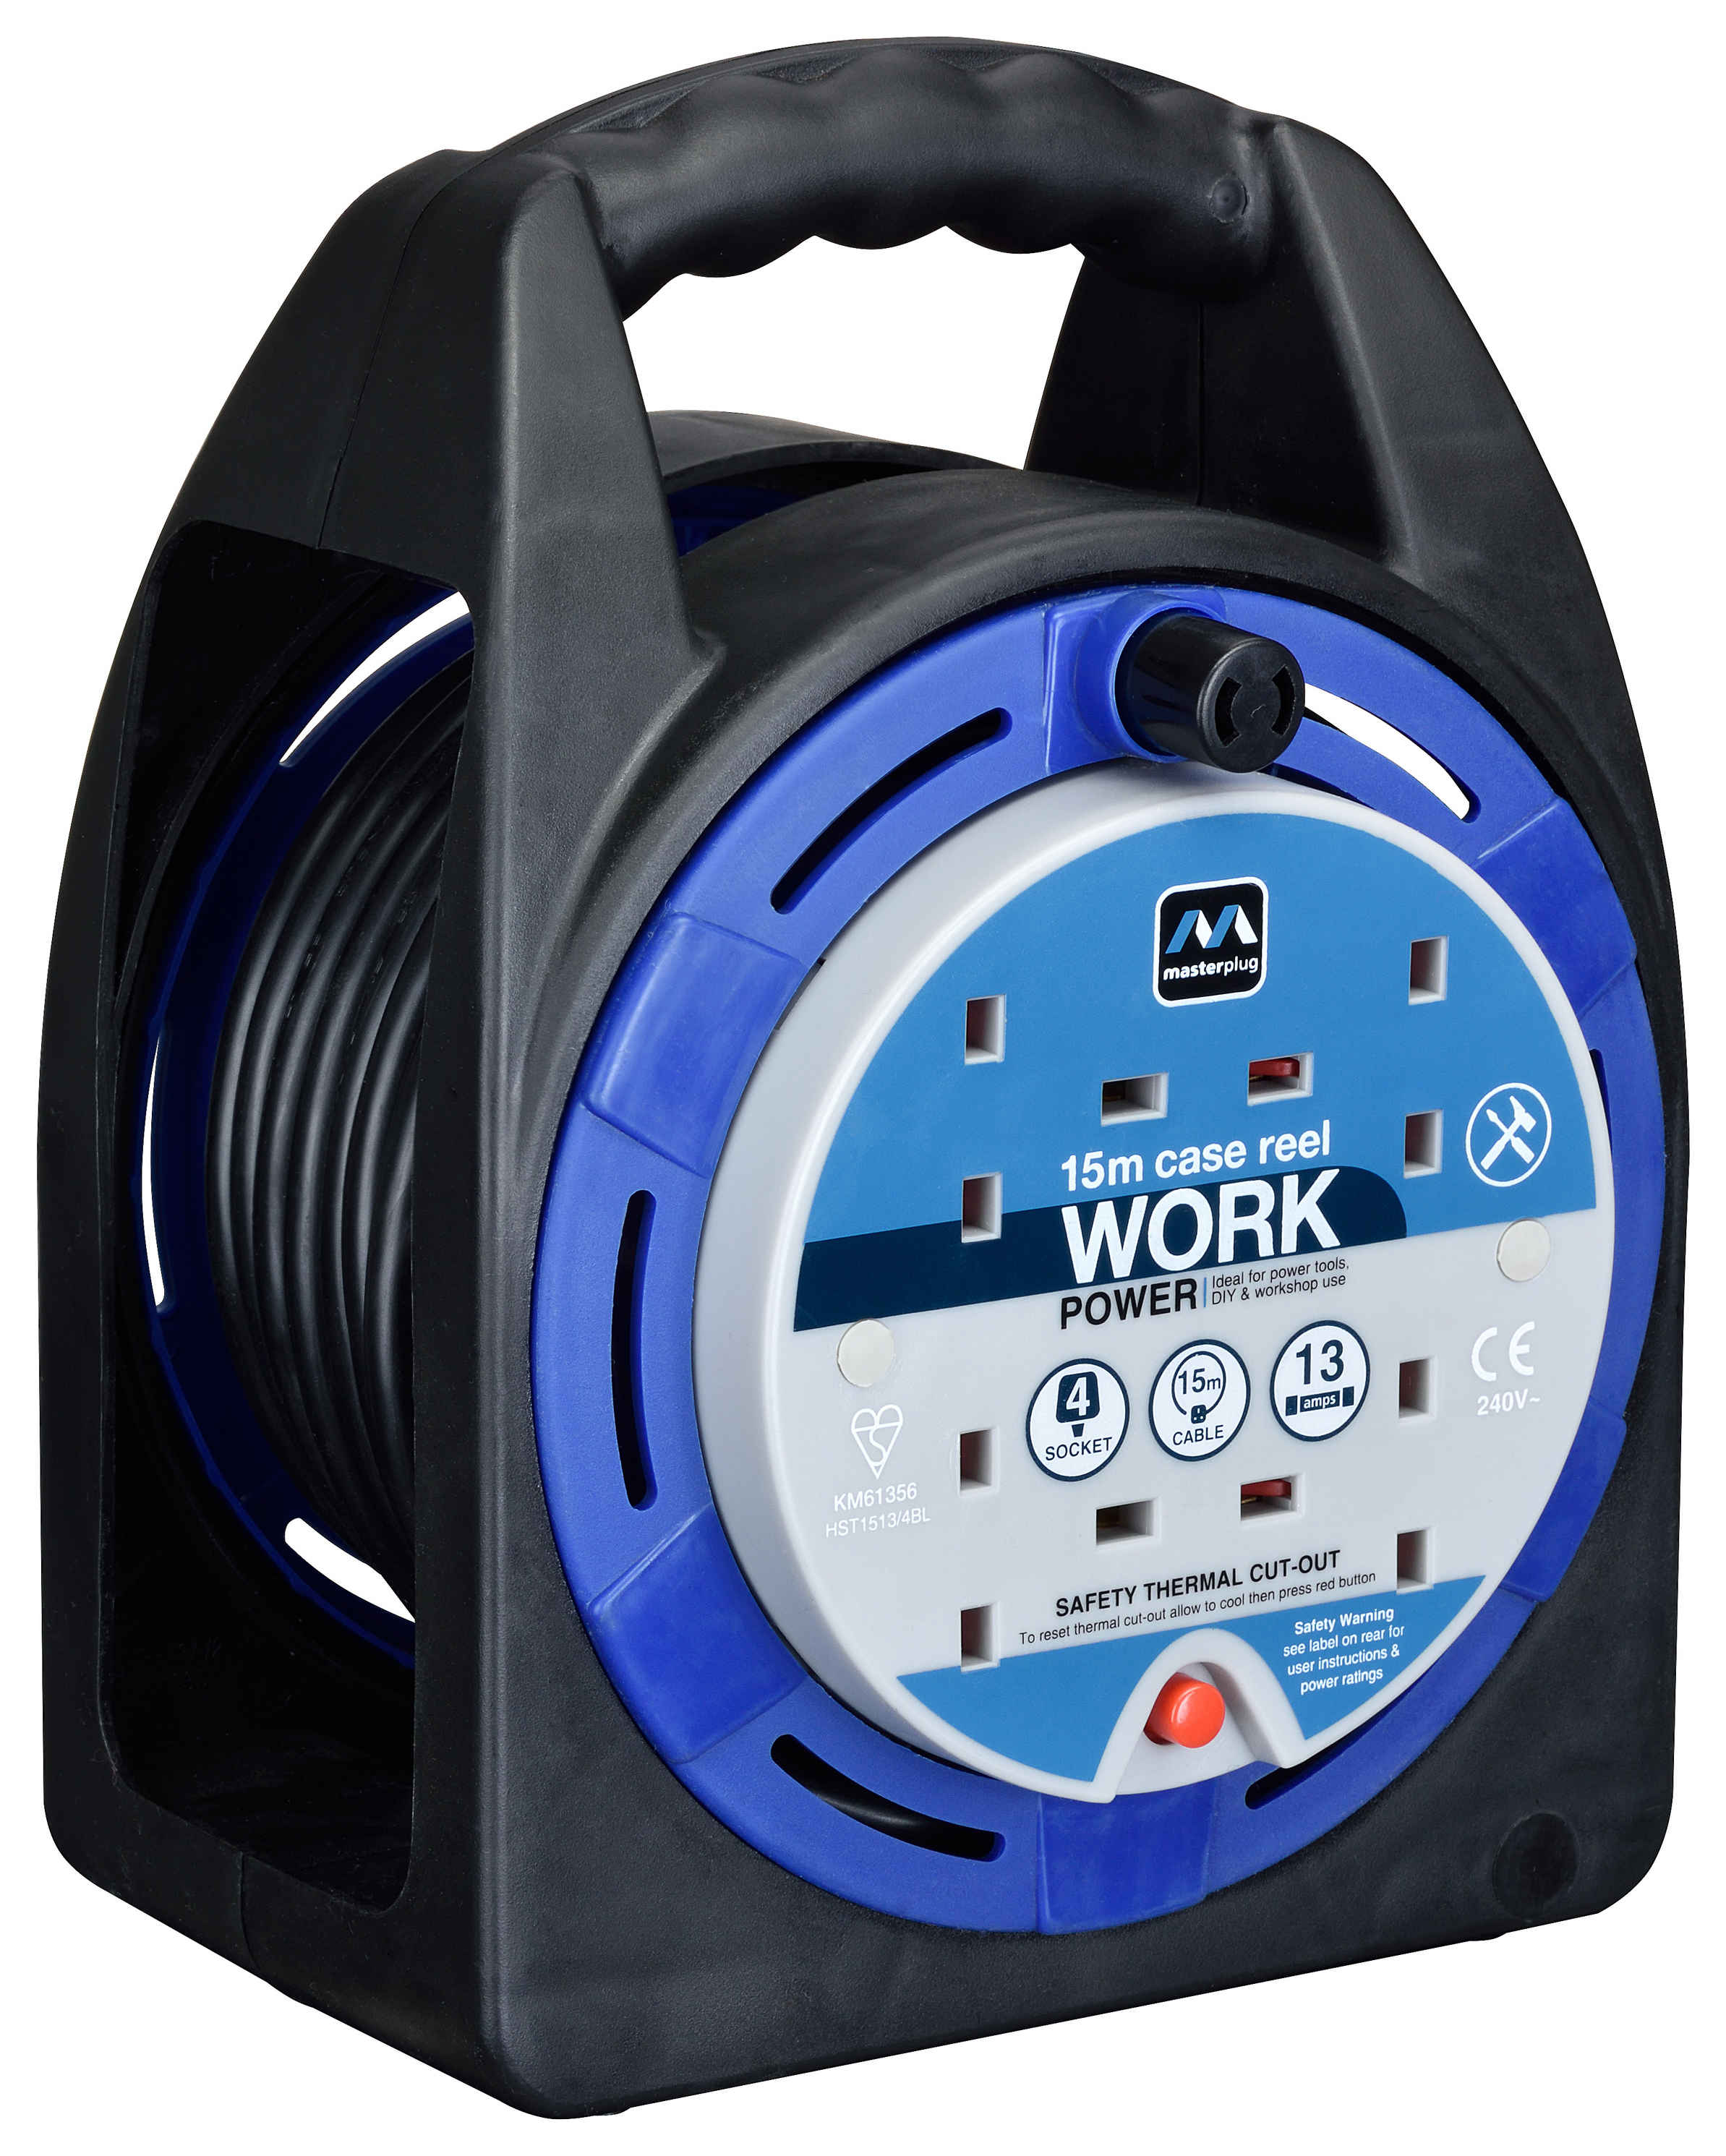 Masterplug 4 Socket 15m 10A Cable Reel with Thermal Cut-Out - Blue